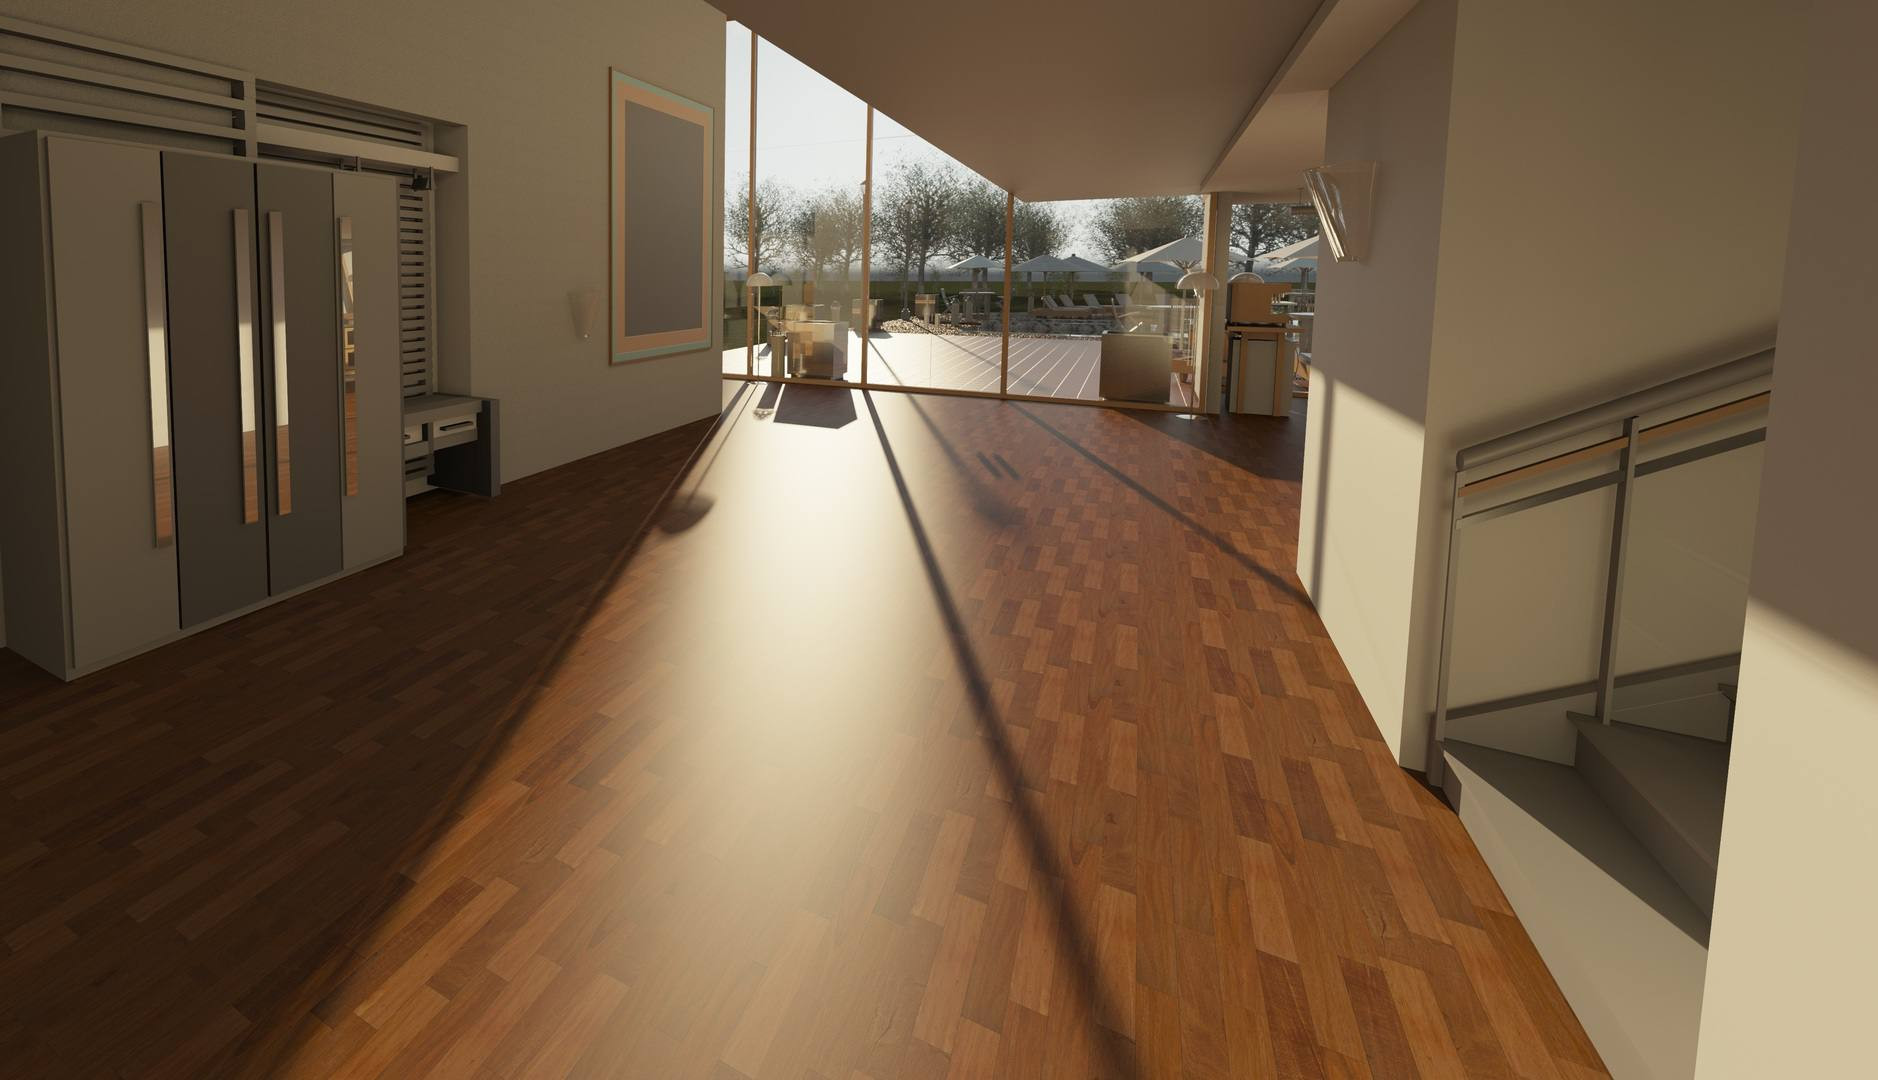 23 Fantastic Hardwood Floor Maintenance Cleaning 2023 free download hardwood floor maintenance cleaning of common flooring types currently used in renovation and building inside architecture wood house floor interior window 917178 pxhere com 5ba27a2cc9e77c00